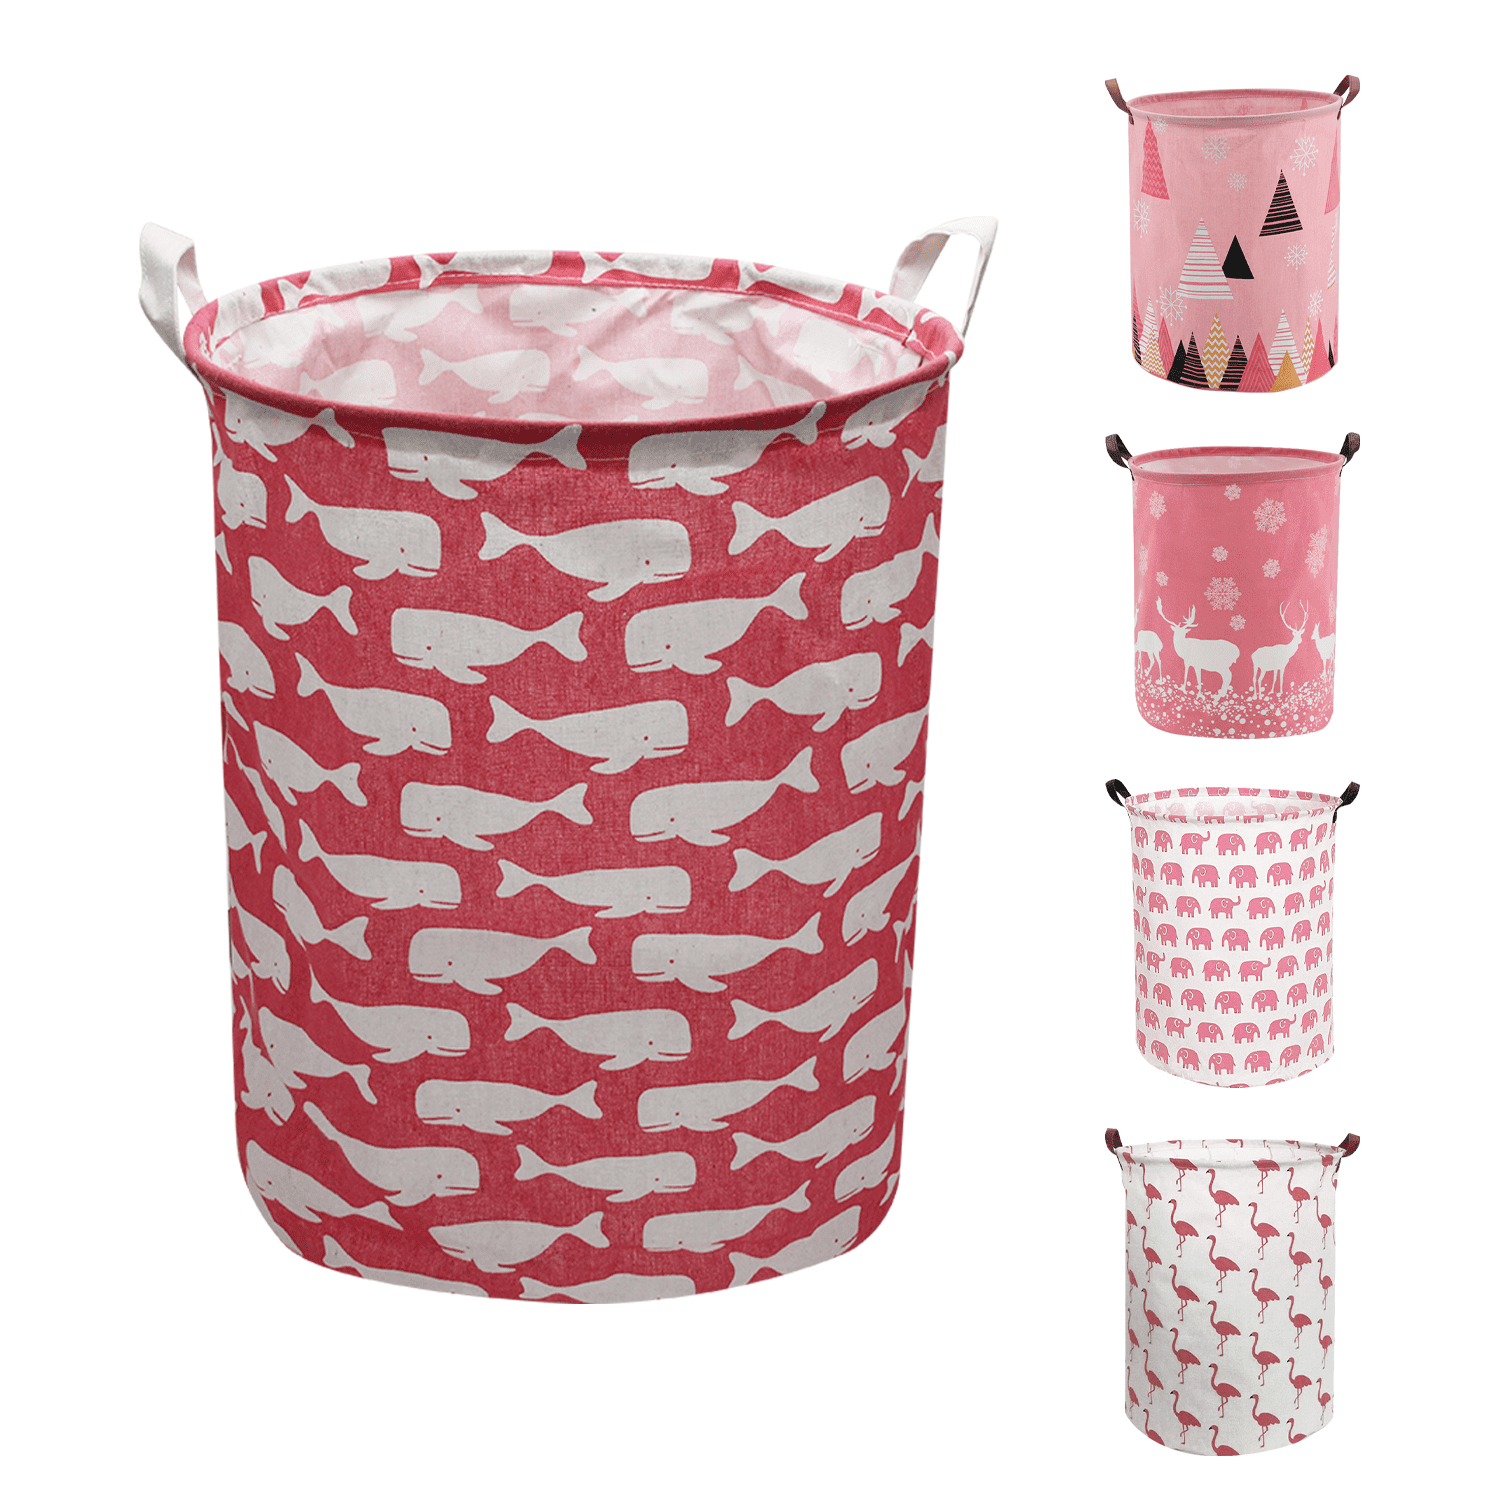 19 Large Sized Toy storage bucket Cute Pattern Design Laundry Hamper Cotton Fabric Cylindric Storage Bin with Rope Handles Style5 